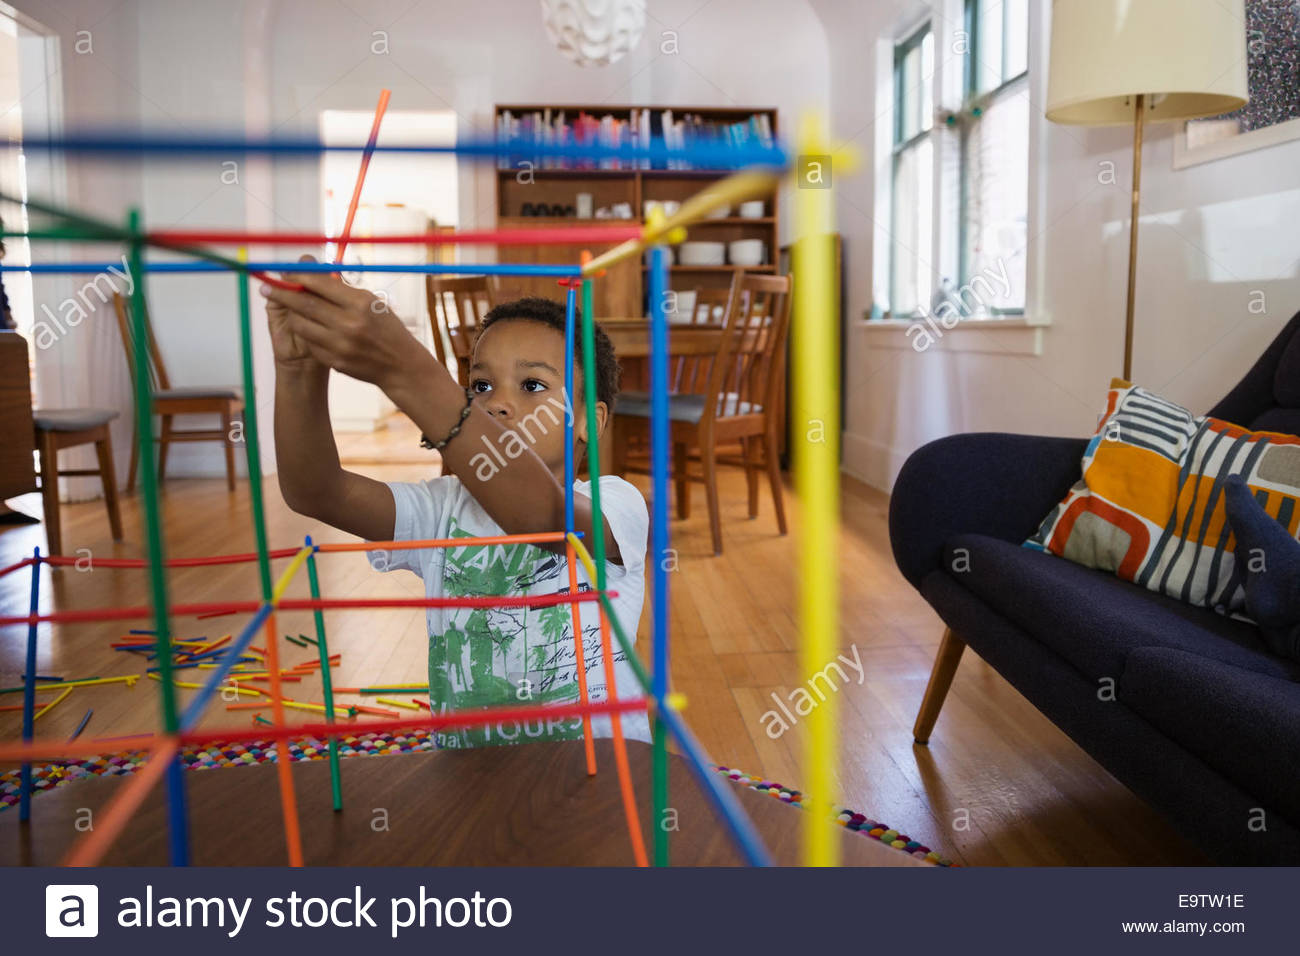 Boy constructing connector toy in living room Stock Photo